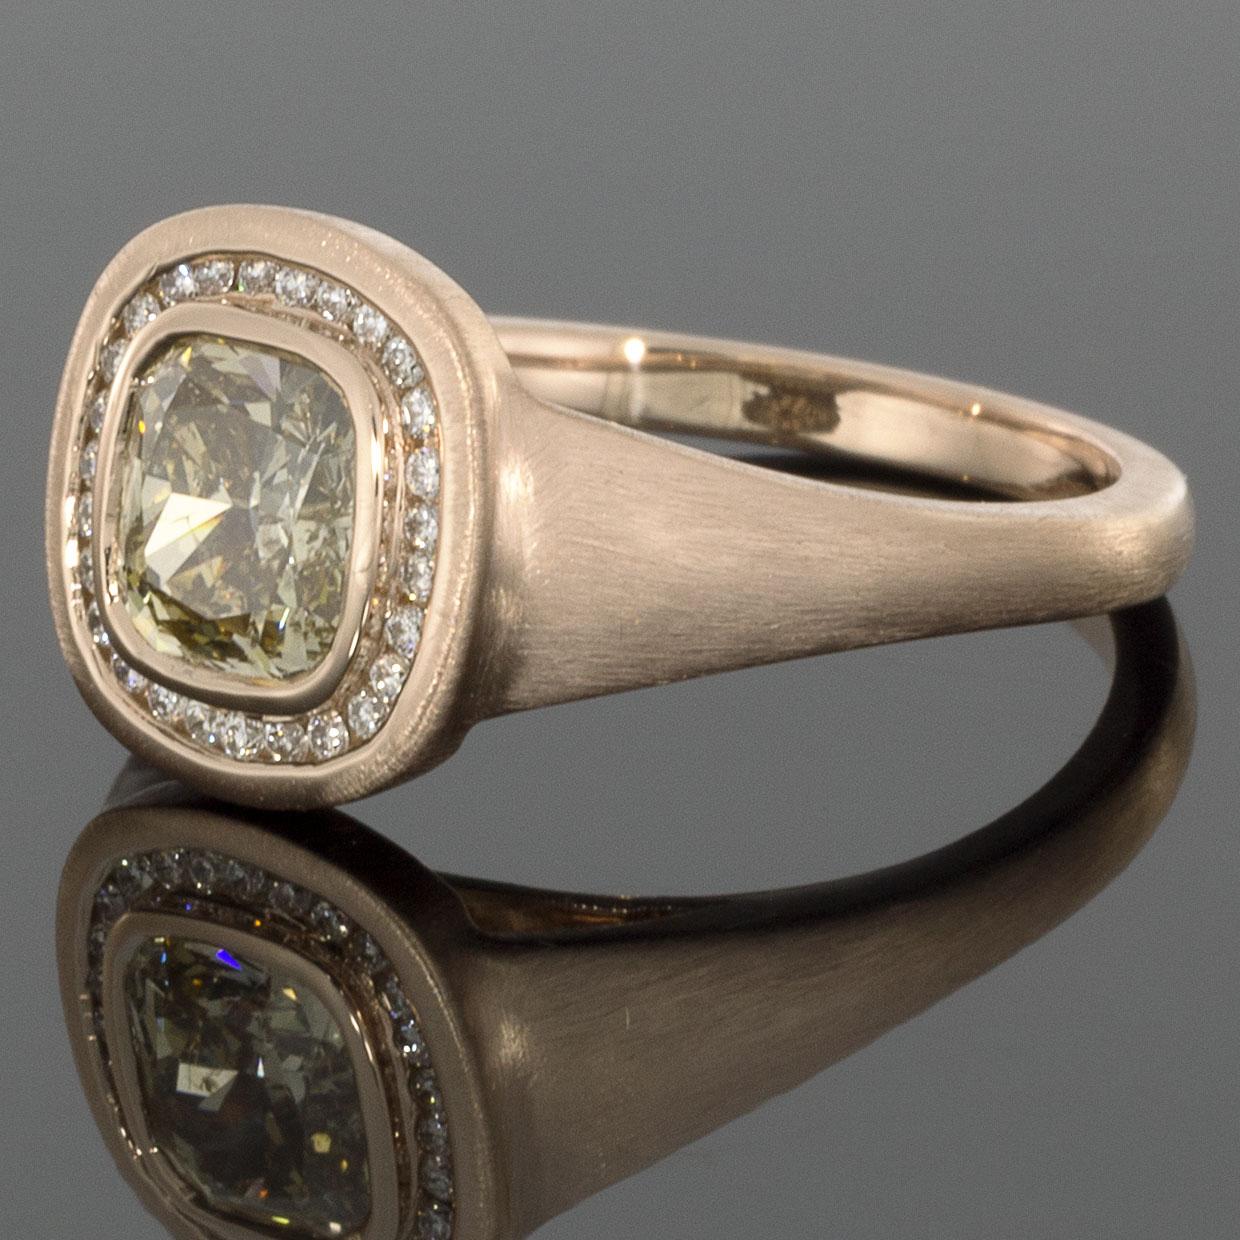 Item Details:
Estimated Retail - $7,150.00
Metal - 14 Karat Rose Gold
Total Carat Weight (TCW) - 1.24 ctw
Certification/Grading - GIA 1192514402
Style - Custom Made Halo Ring
Ring Size - 6.50
Sizable - Yes
Width - 6.00 mm

Stone 1 Information